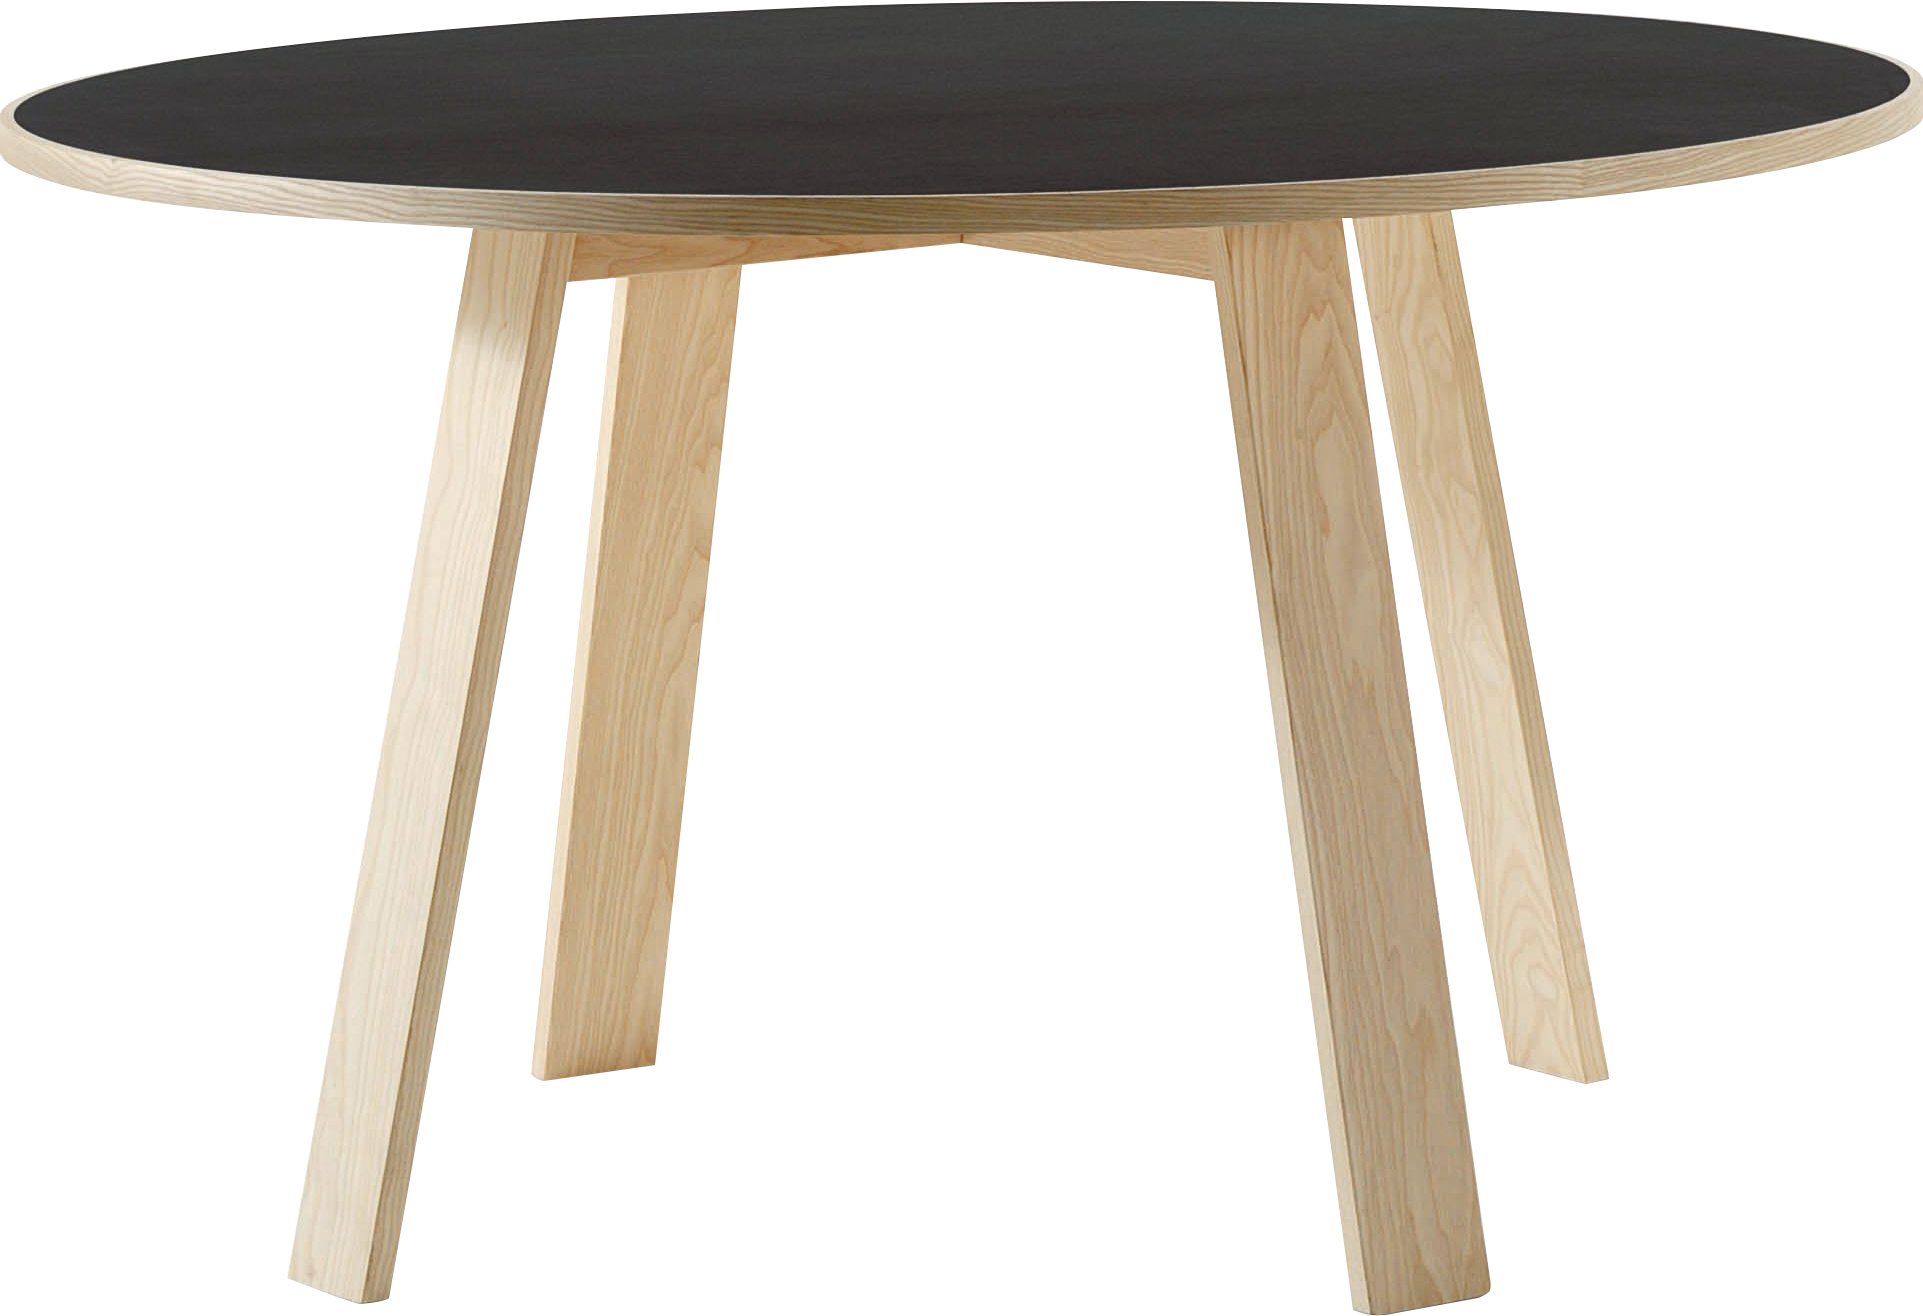 Table Png Image Transparent Image Download, Size: 1923x1316px Regarding Transparent Side Tables For Living Rooms (View 8 of 20)